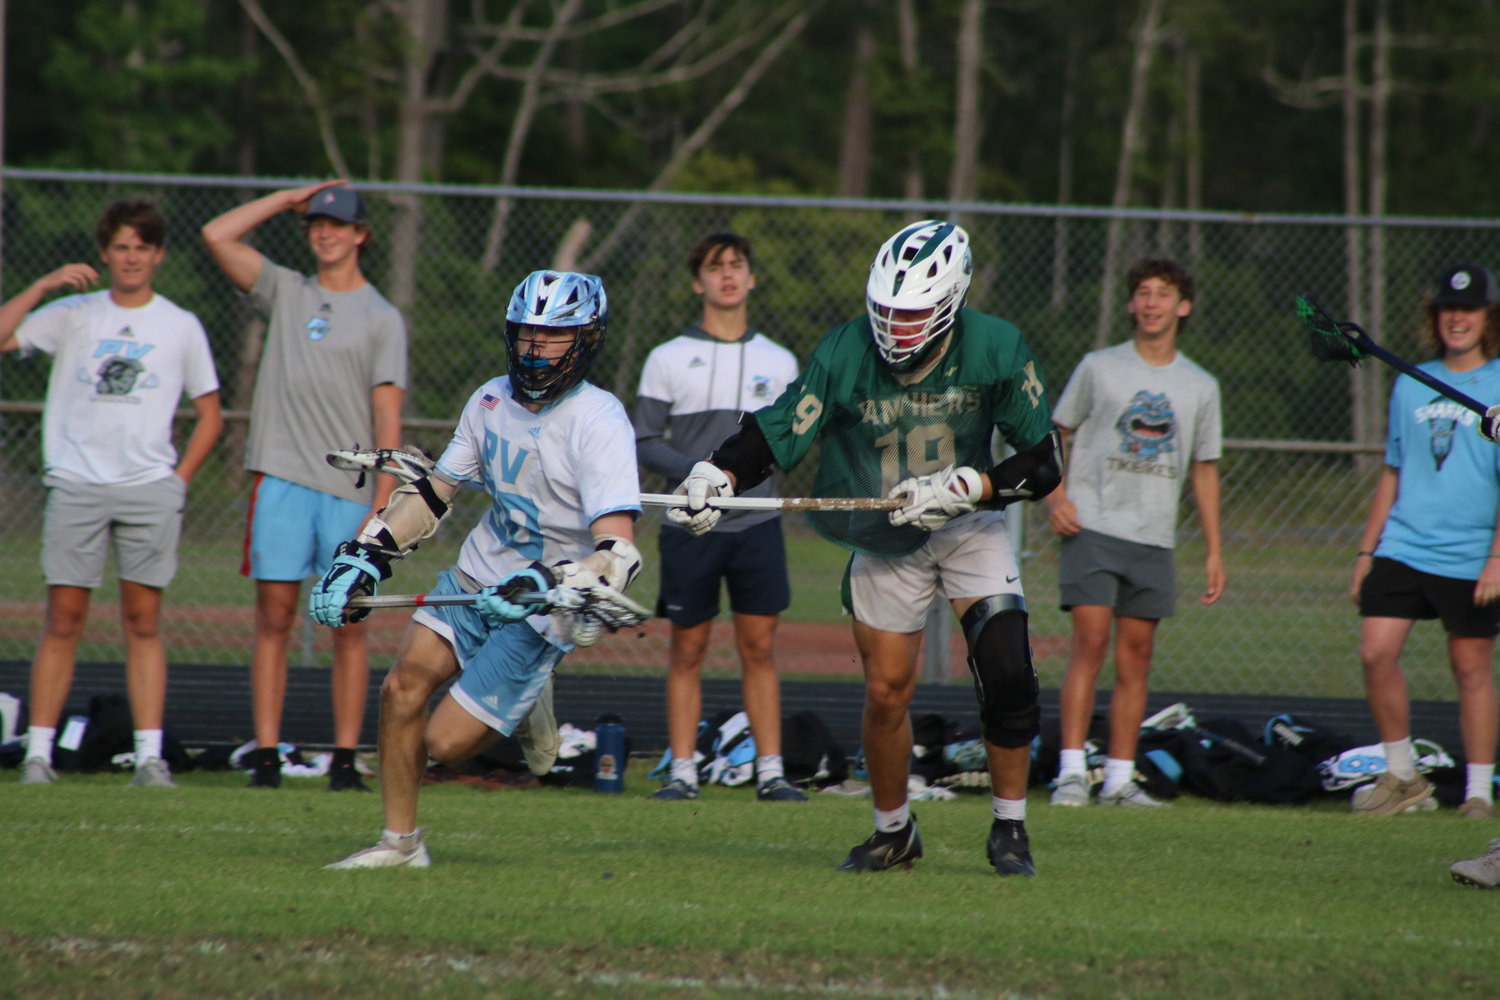 Ponte Vedra’s Maddox Johnson works to get past Nease’s Jordan McGovern in defense during the district title game April 13.